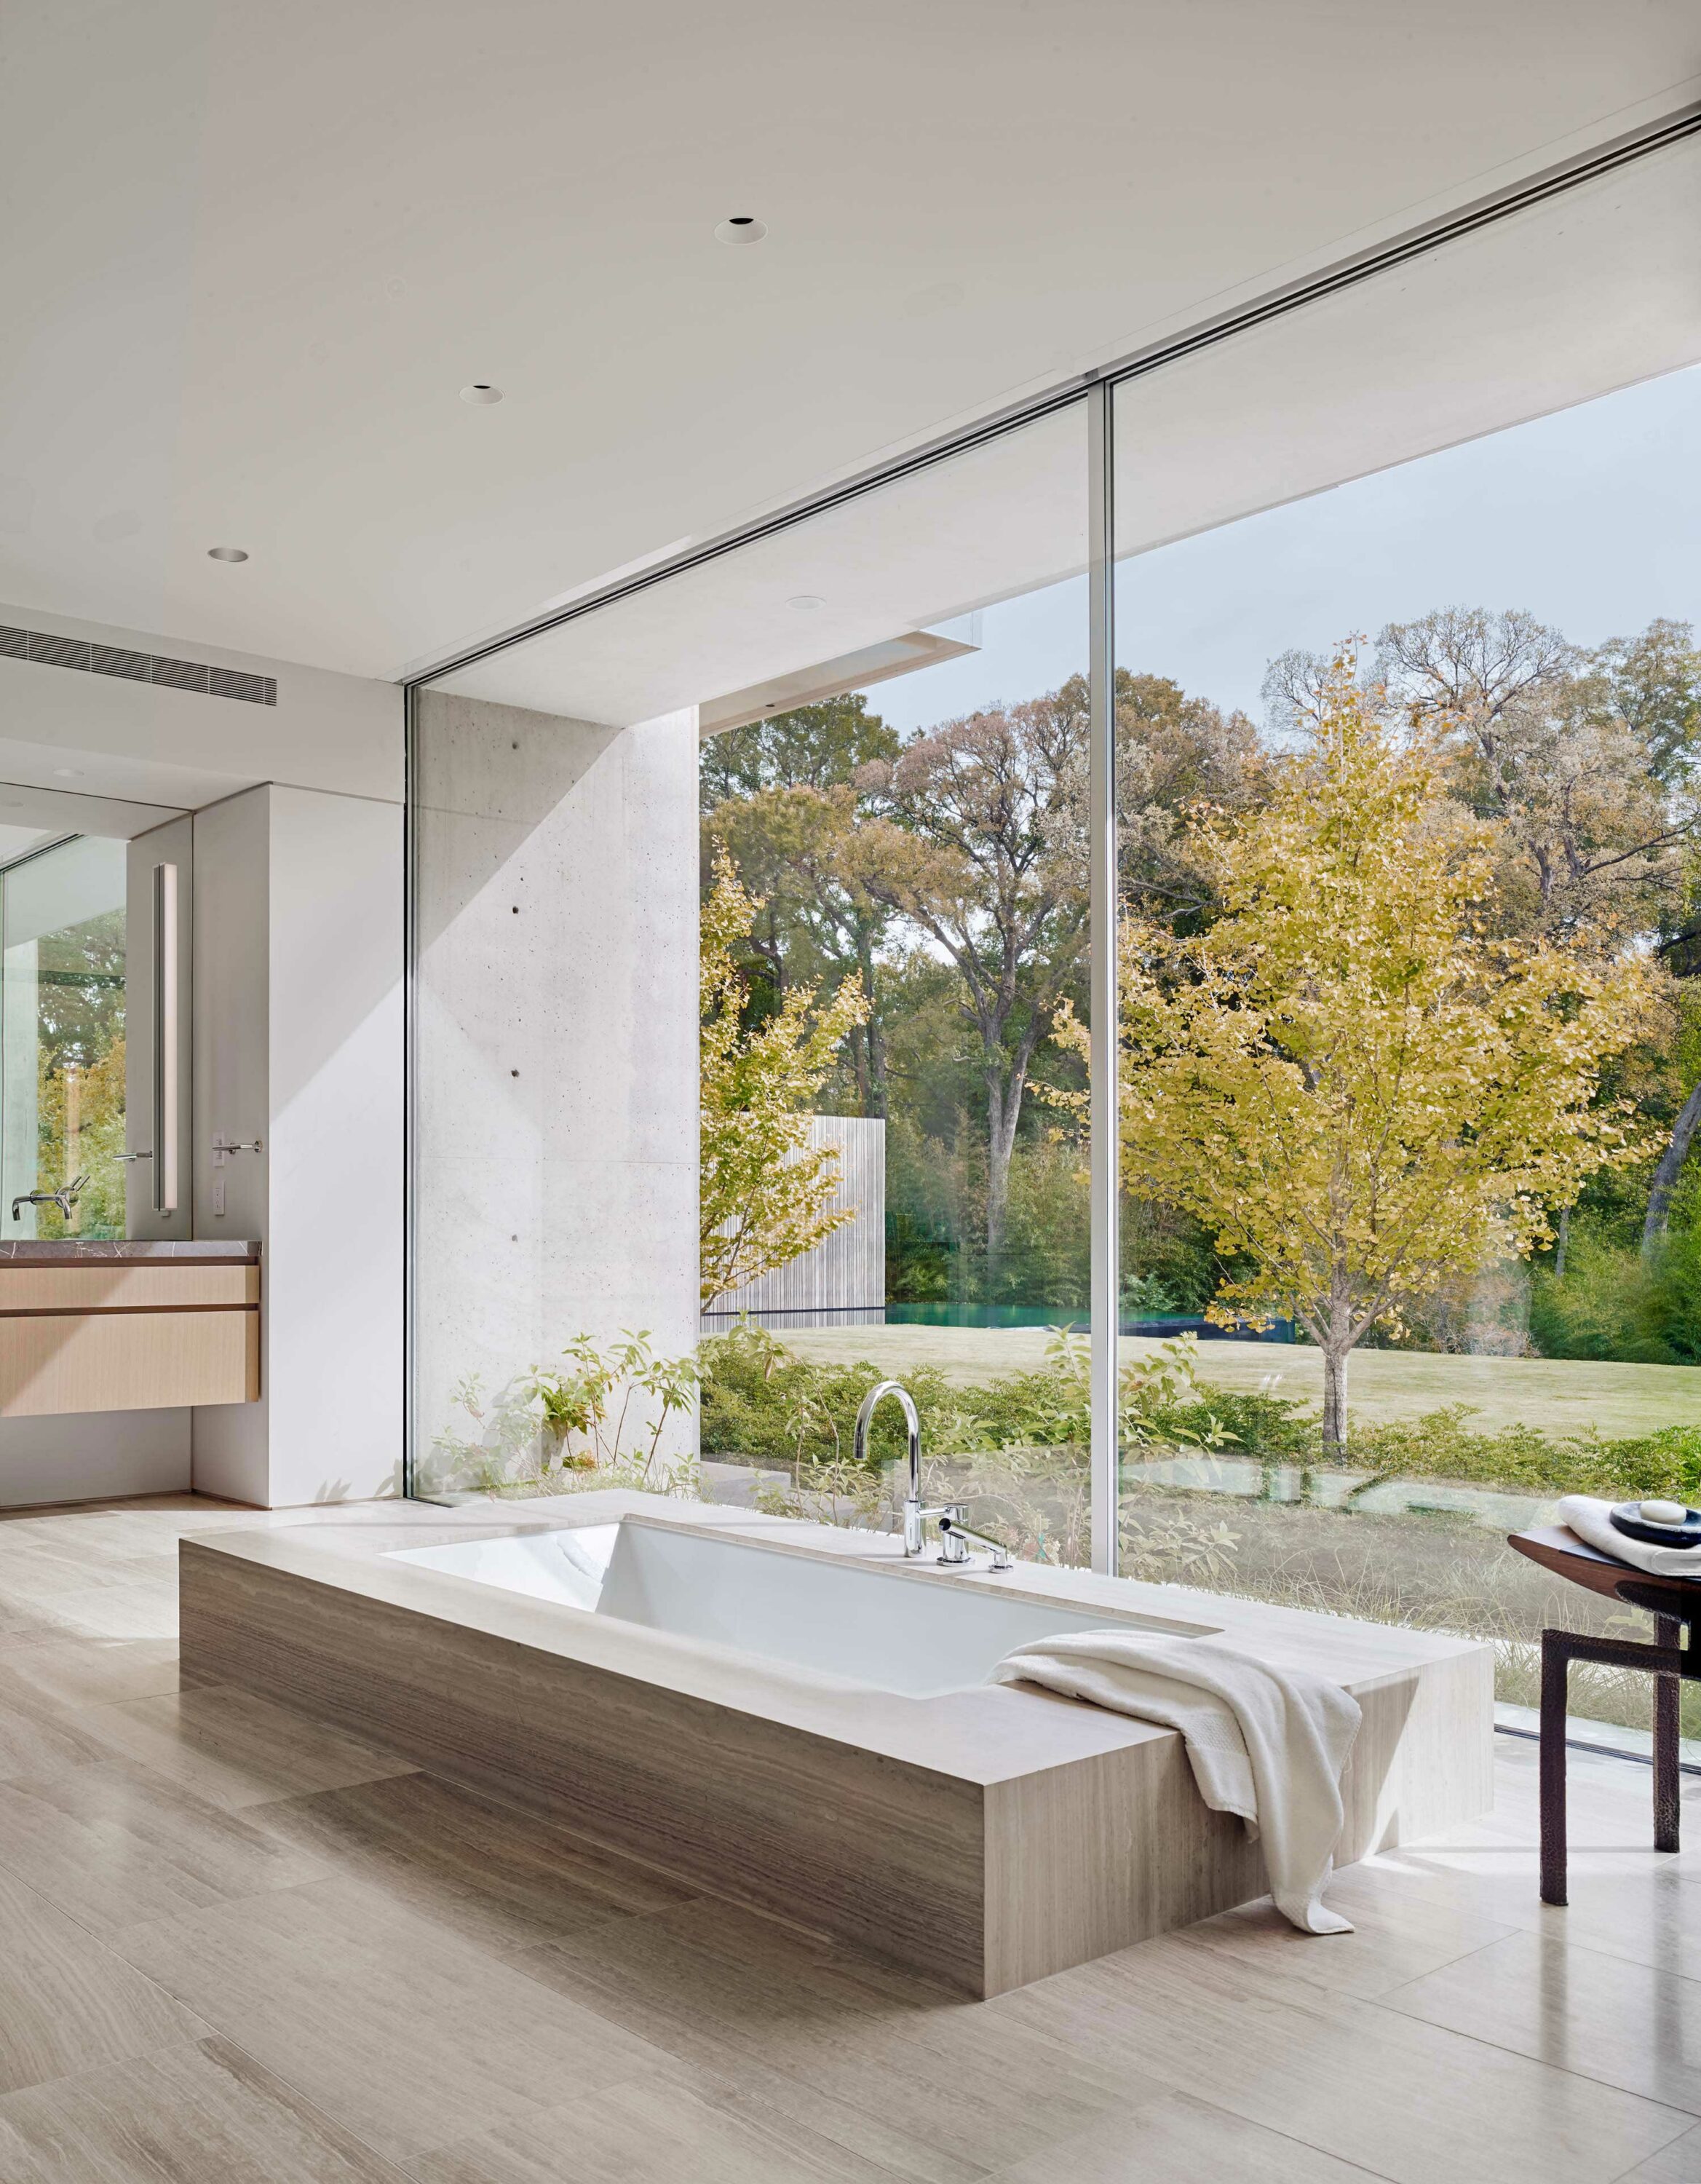 Interior photo of the Preston Hollow Residence by Specht Novak Architects. Shot by Manolo Langis, featuring bathtub, sink, and views of the backyard.